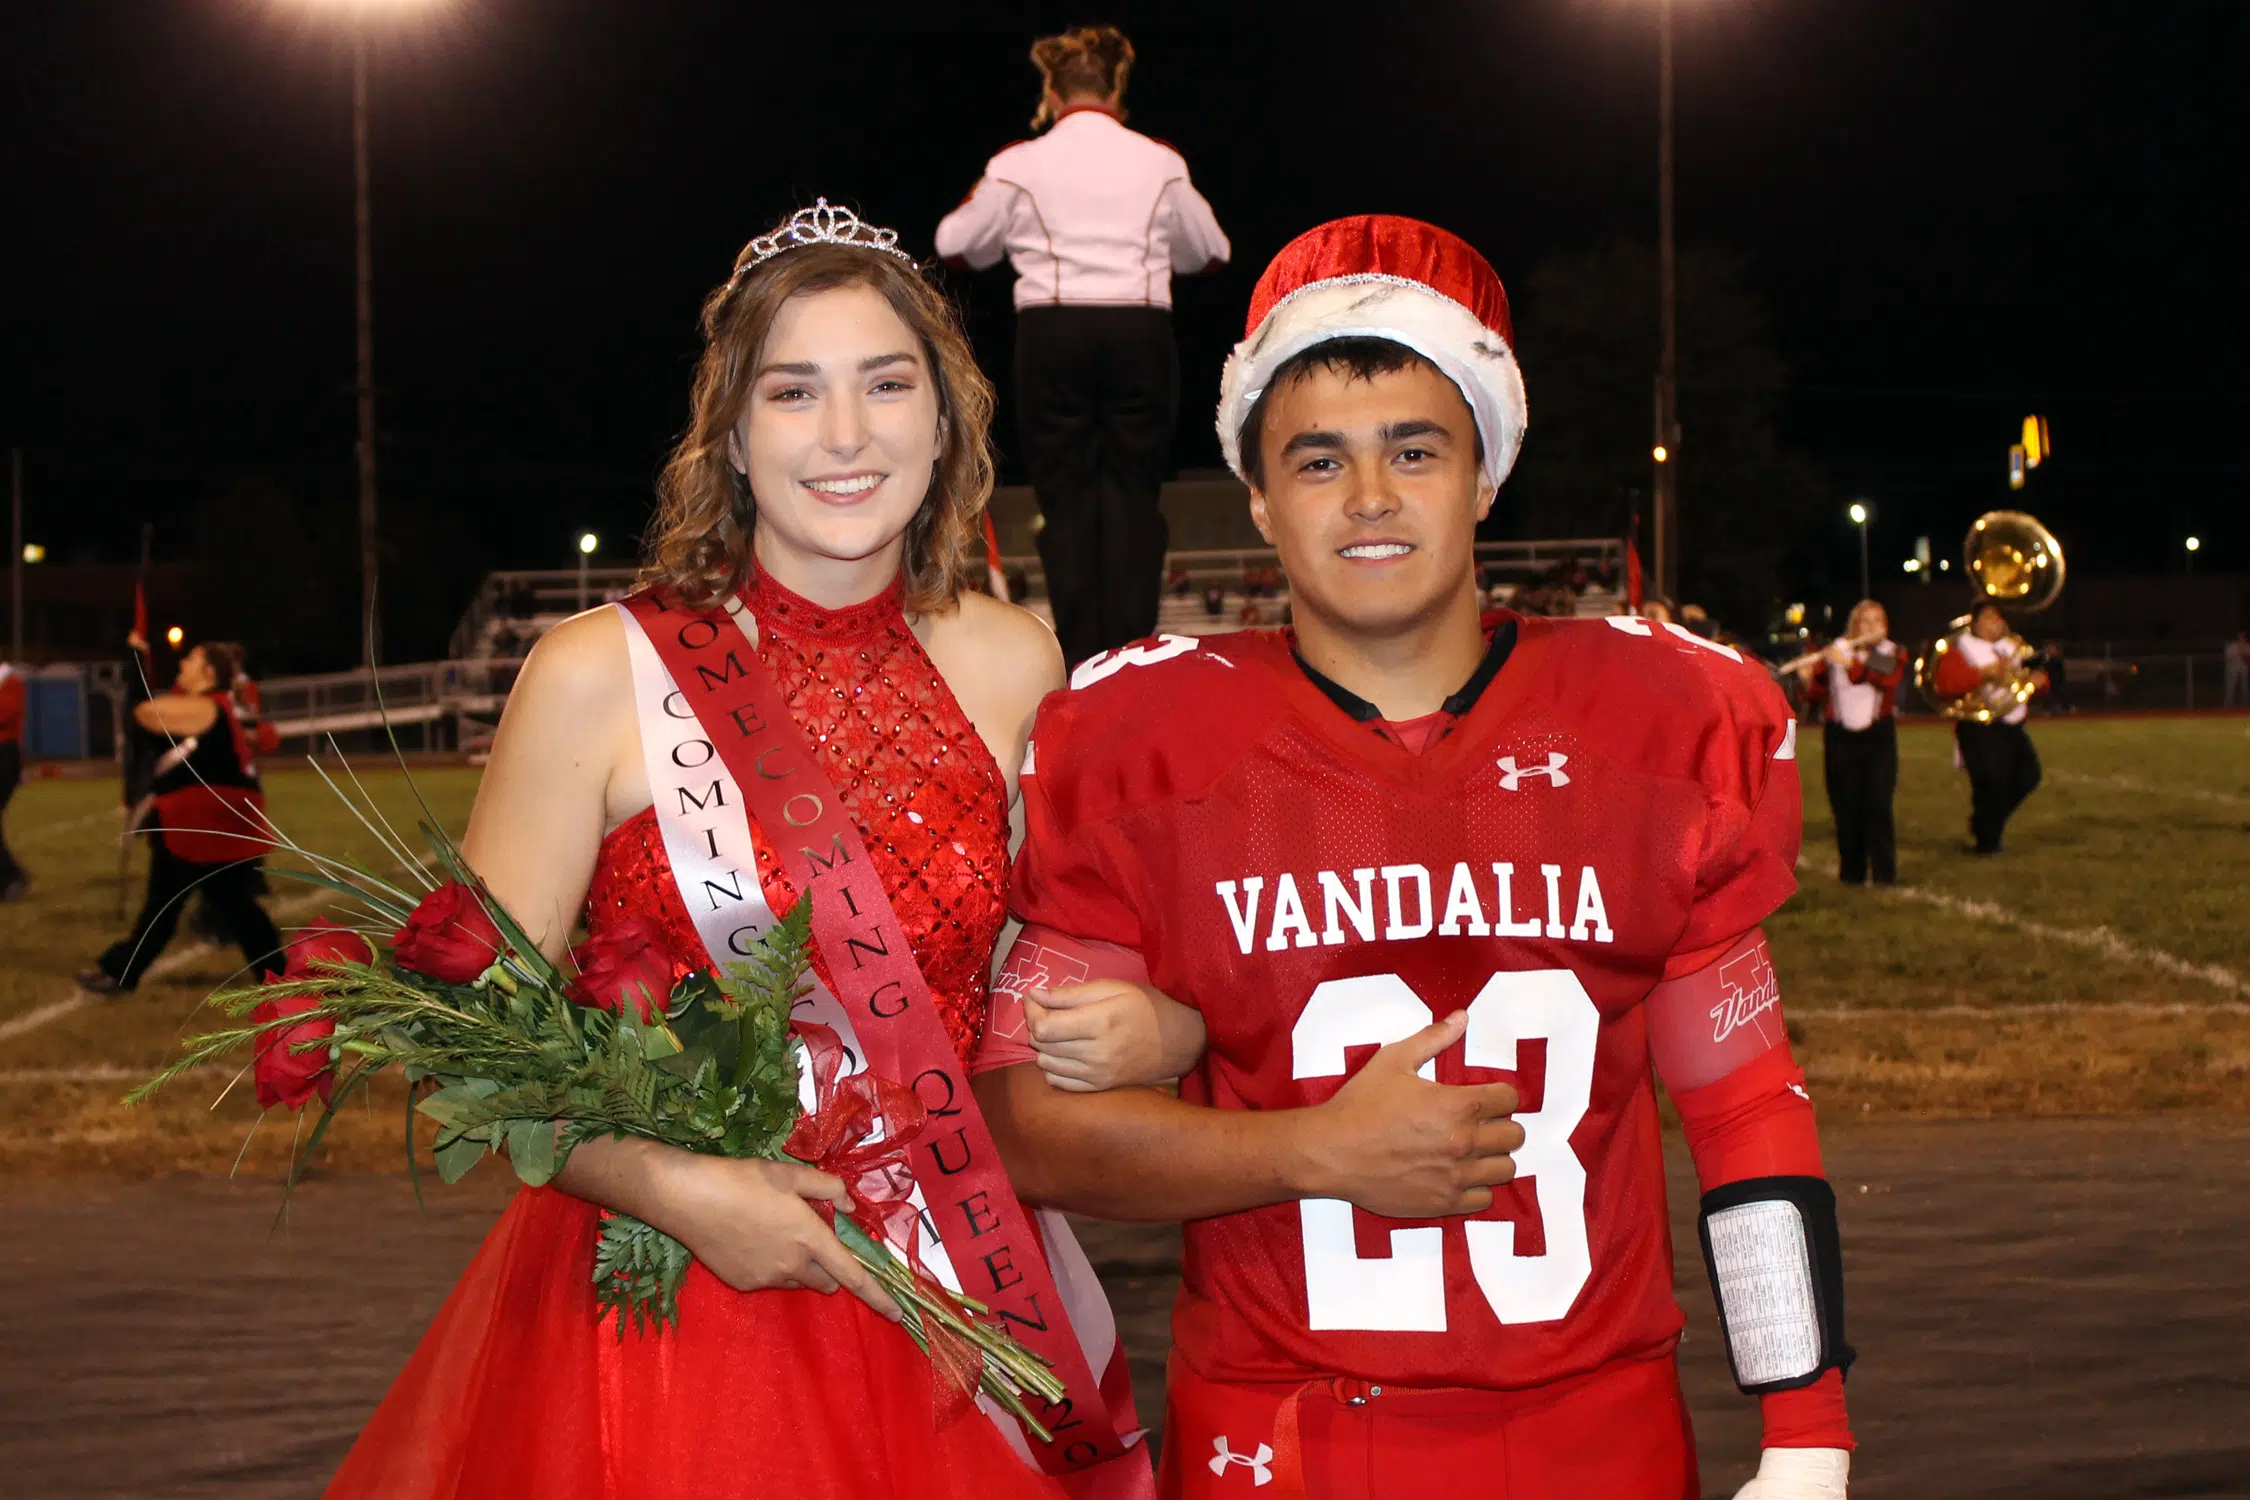 Taylor & Zimmerman VCHS Homecoming King and Queen for 2017 